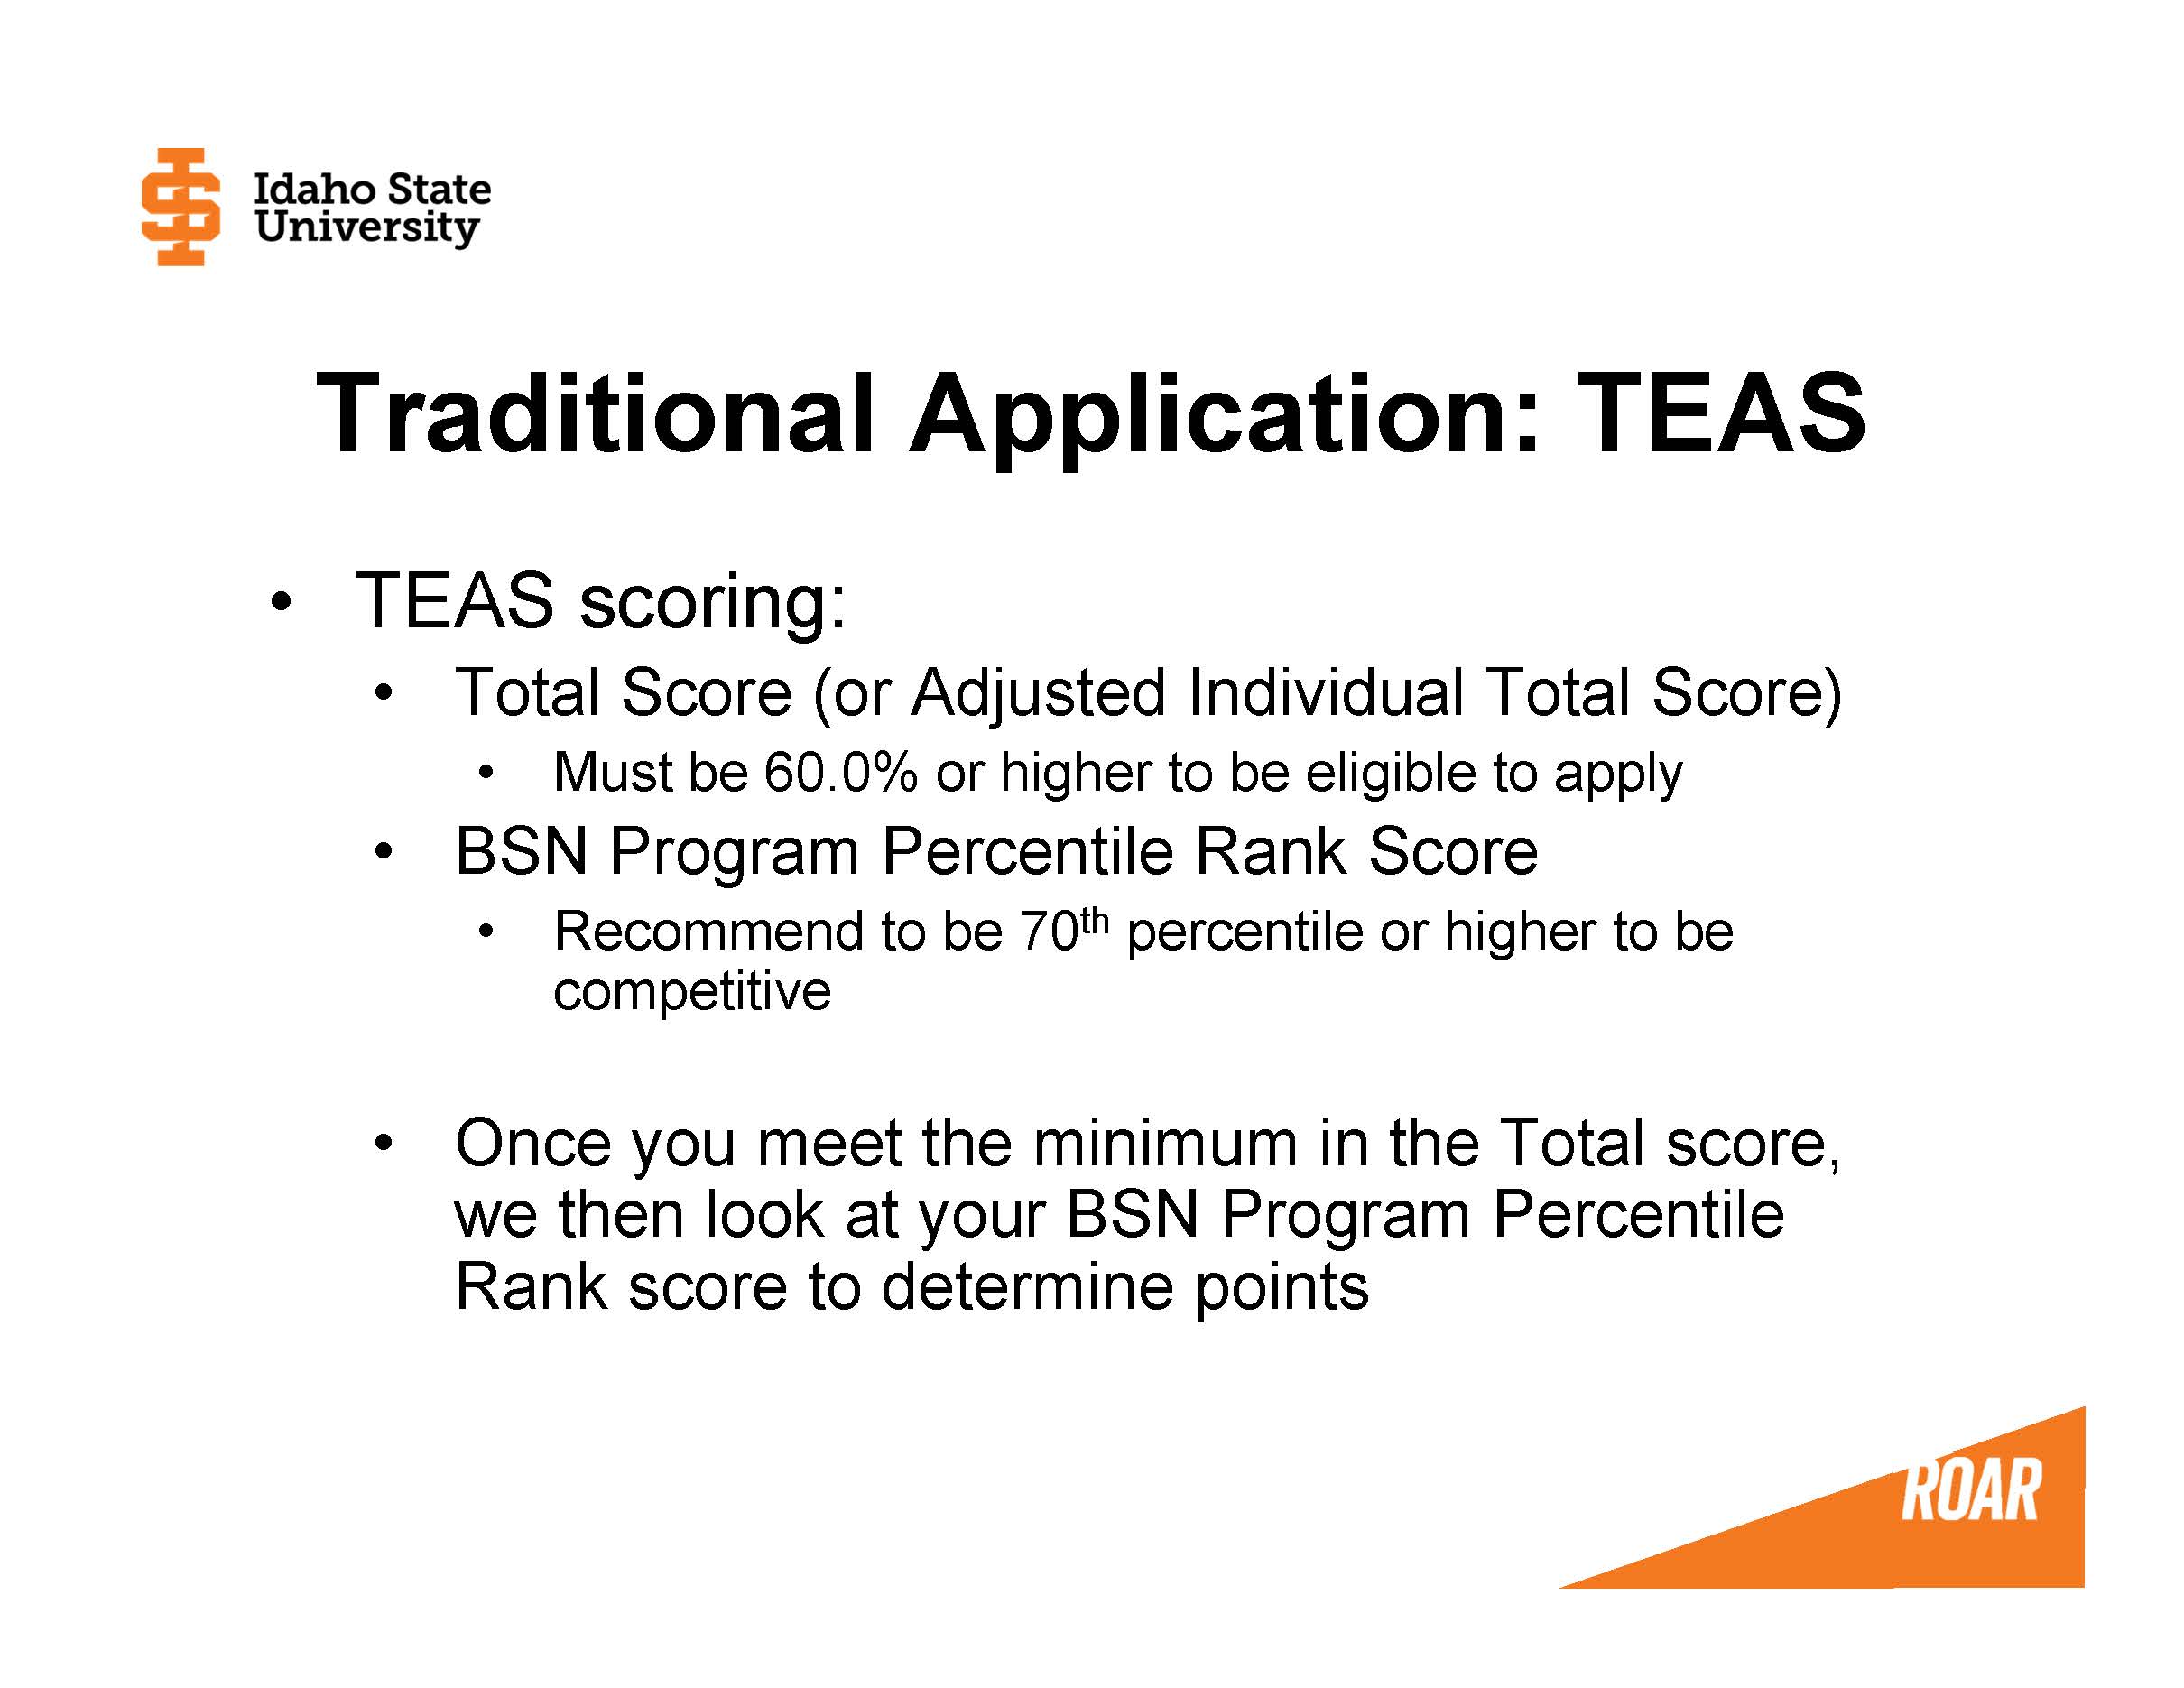 TEAS scoring: Total Score (or Adjusted Individual Total Score) Must be 60.0% or higher to be eligible to apply BSN Program Percentile Rank Score Recommend to be 70th percentile or higher to be competitive  Once you meet the minimum in the Total score, we then look at your BSN Program Percentile Rank score to determine points